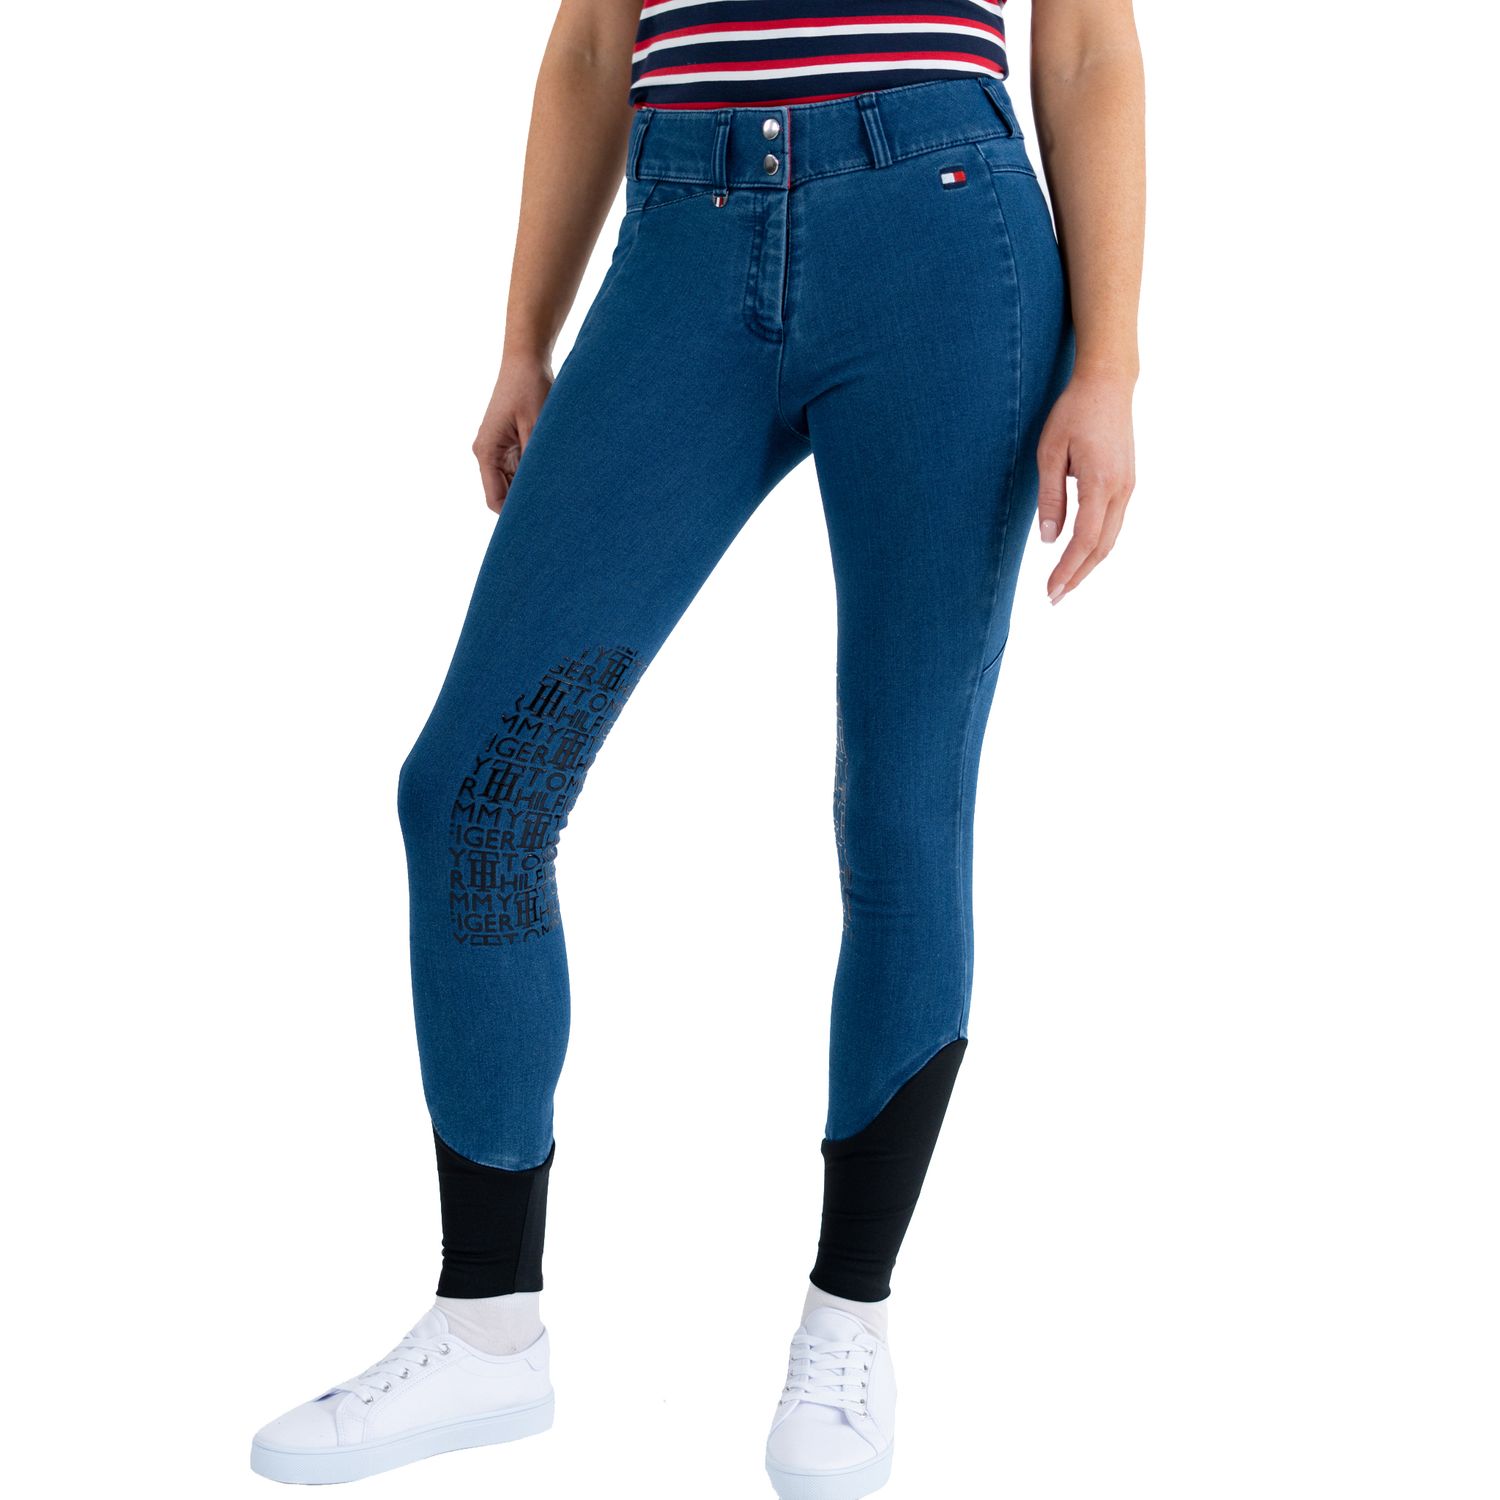 Tommy Hilfiger Equestrian Jeans Style Kniebesatz Reithose Damen von Tommy Hilfiger Equestrian